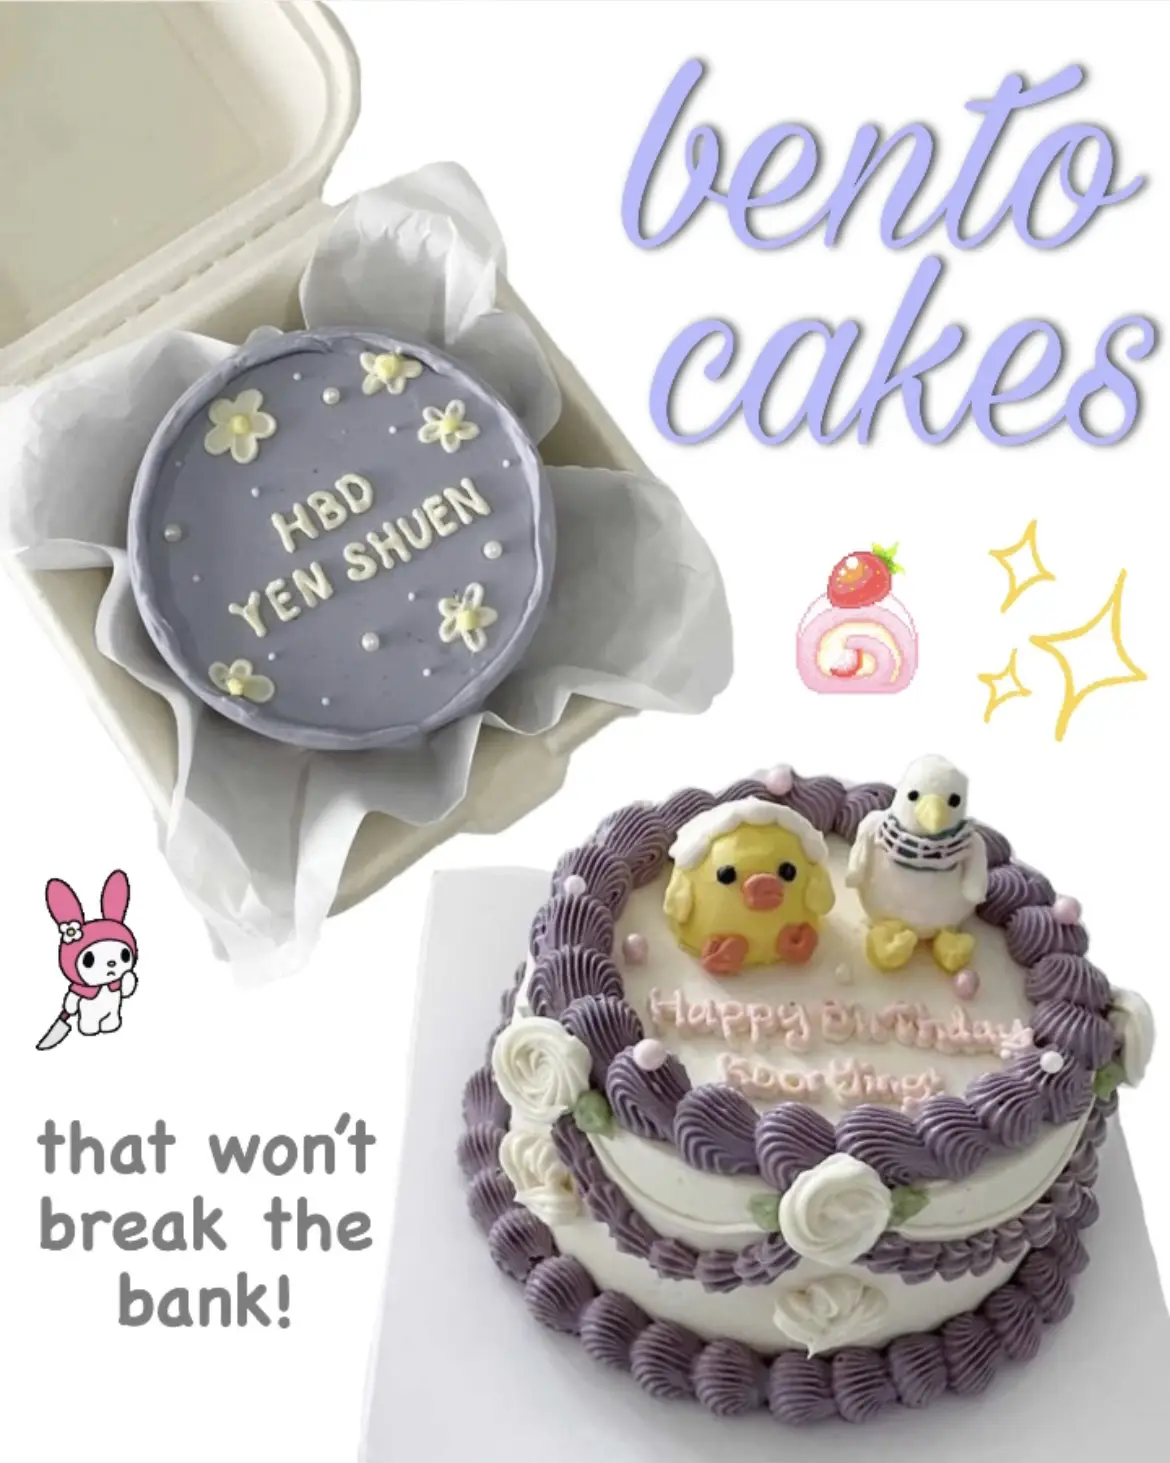 What Are Bento Cakes And Where Did They Come From?